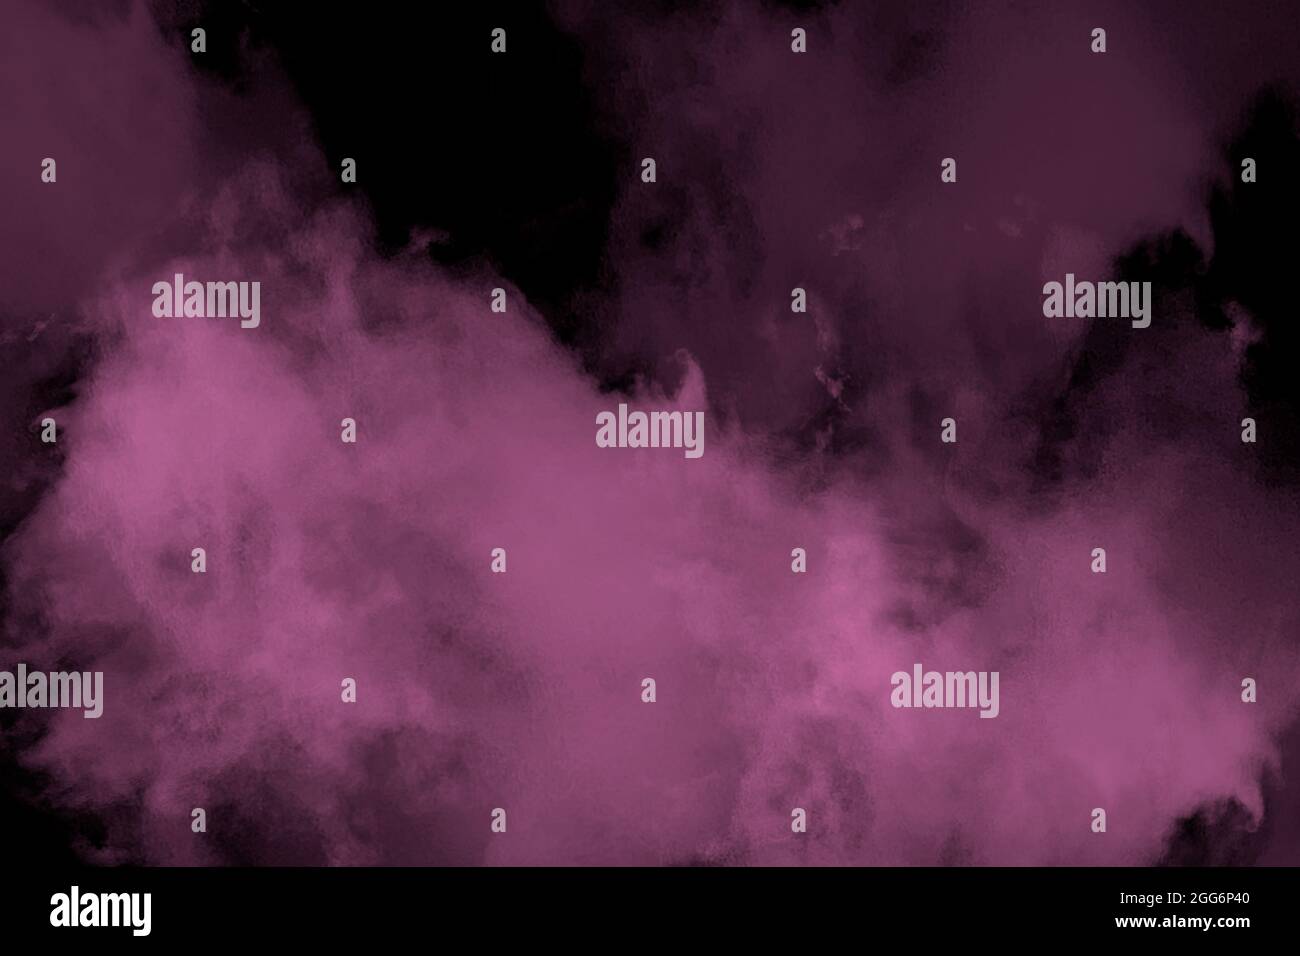 This is a pink smoke or fog overlay to create a special effect on photos and designs Stock Photo